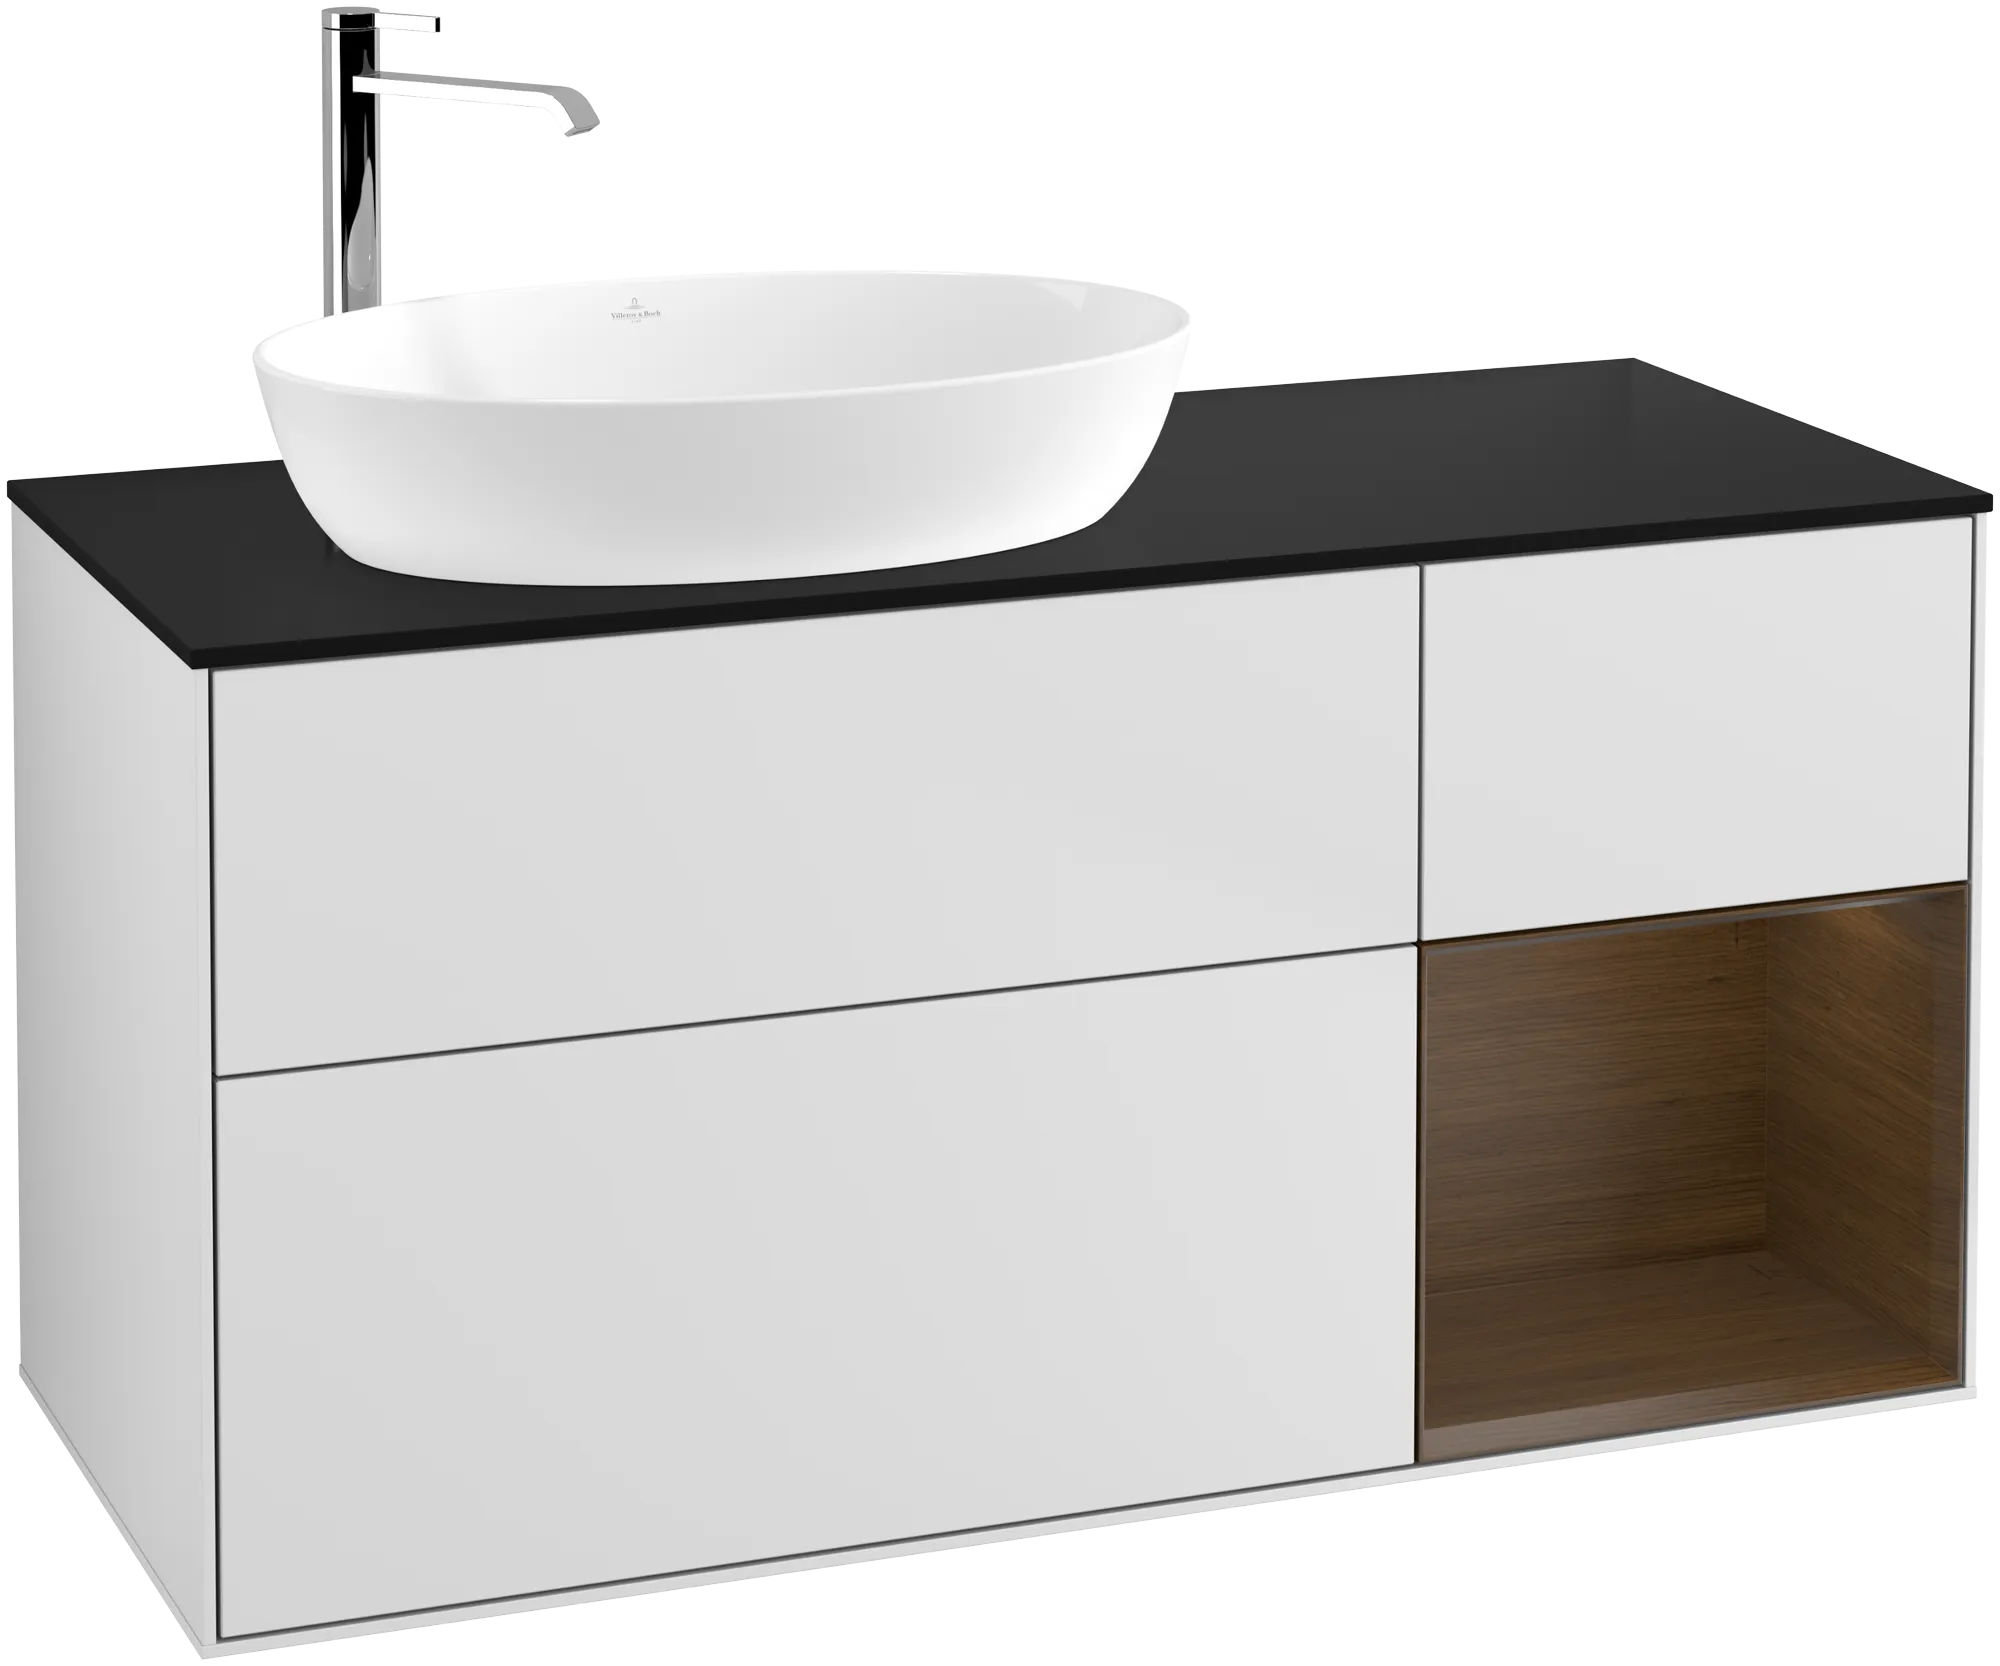 Picture of VILLEROY BOCH Finion Vanity unit, with lighting, 3 pull-out compartments, 1200 x 603 x 501 mm, White Matt Lacquer / Walnut Veneer / Glass Black Matt #G932GNMT